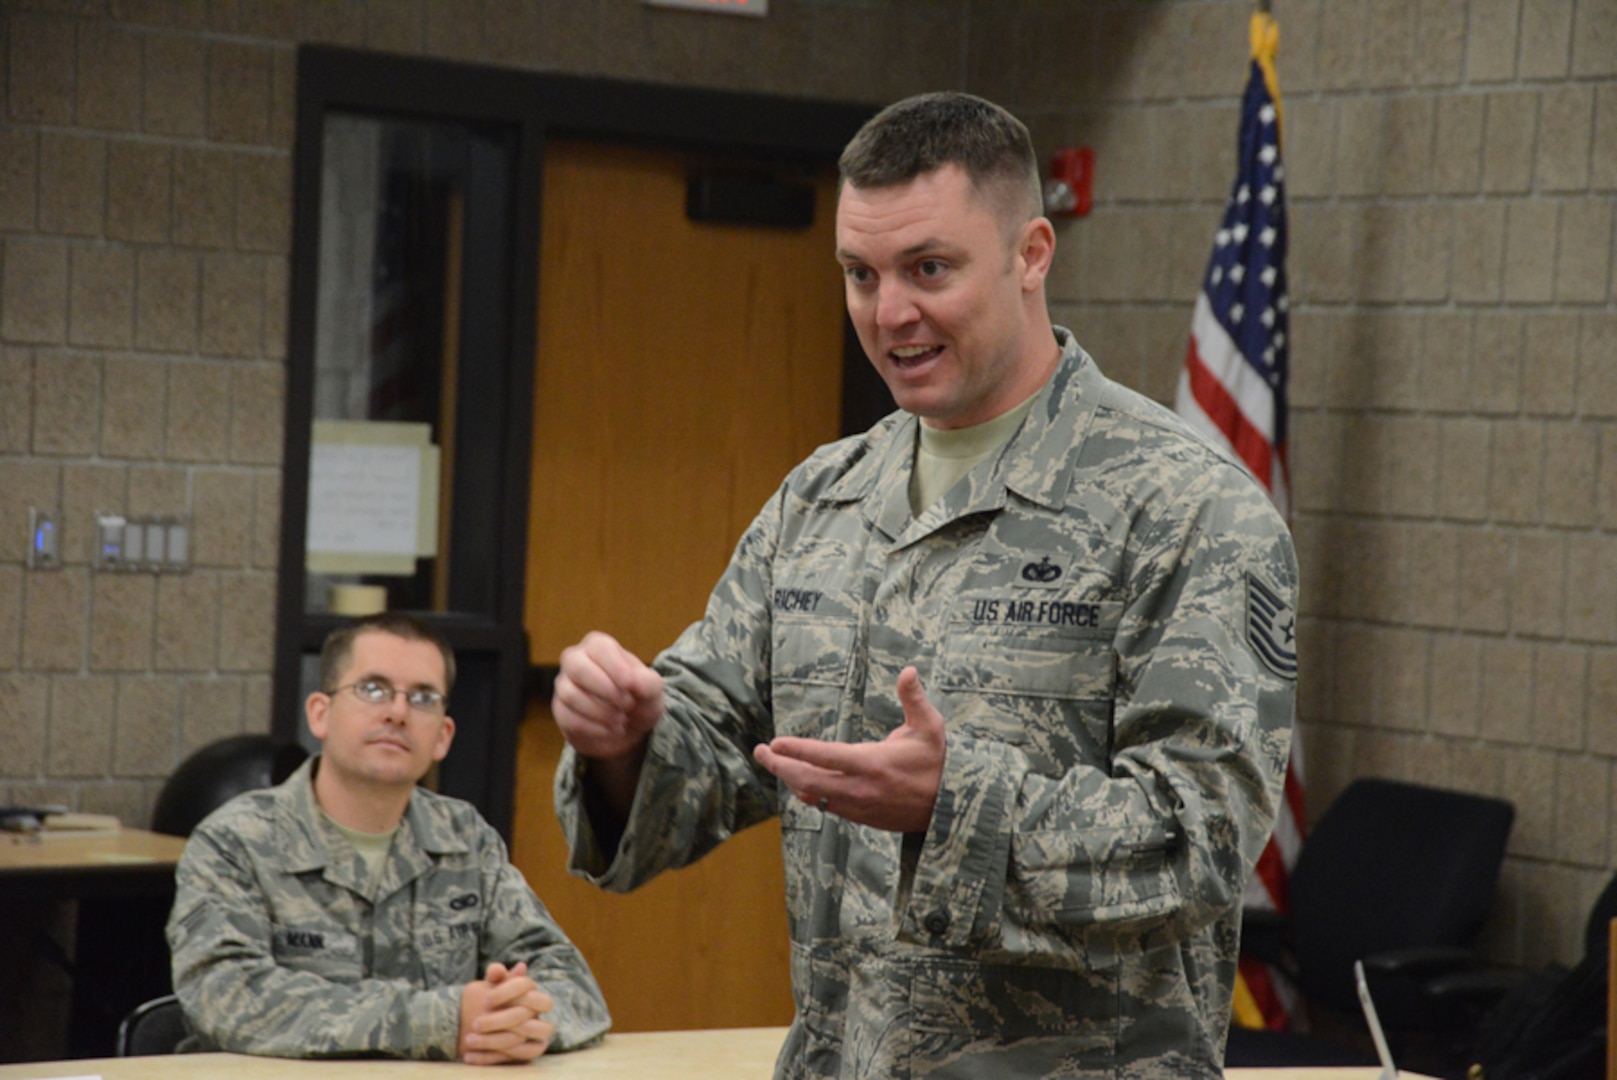 Tech. Sgt. James Richey, an instructor from the Chief Master. Sgt. Richard L. Etchberger Airman Leadership School at Grand Forks Air Force Base, North Dakota, right, instructs students about the rules of an interactive knowledge contest during ALS classroom instruction at the North Dakota Air National Guard Base, Fargo, North Dakota, June 12, 2014, as Senior Airman Christopher Mann looks on.